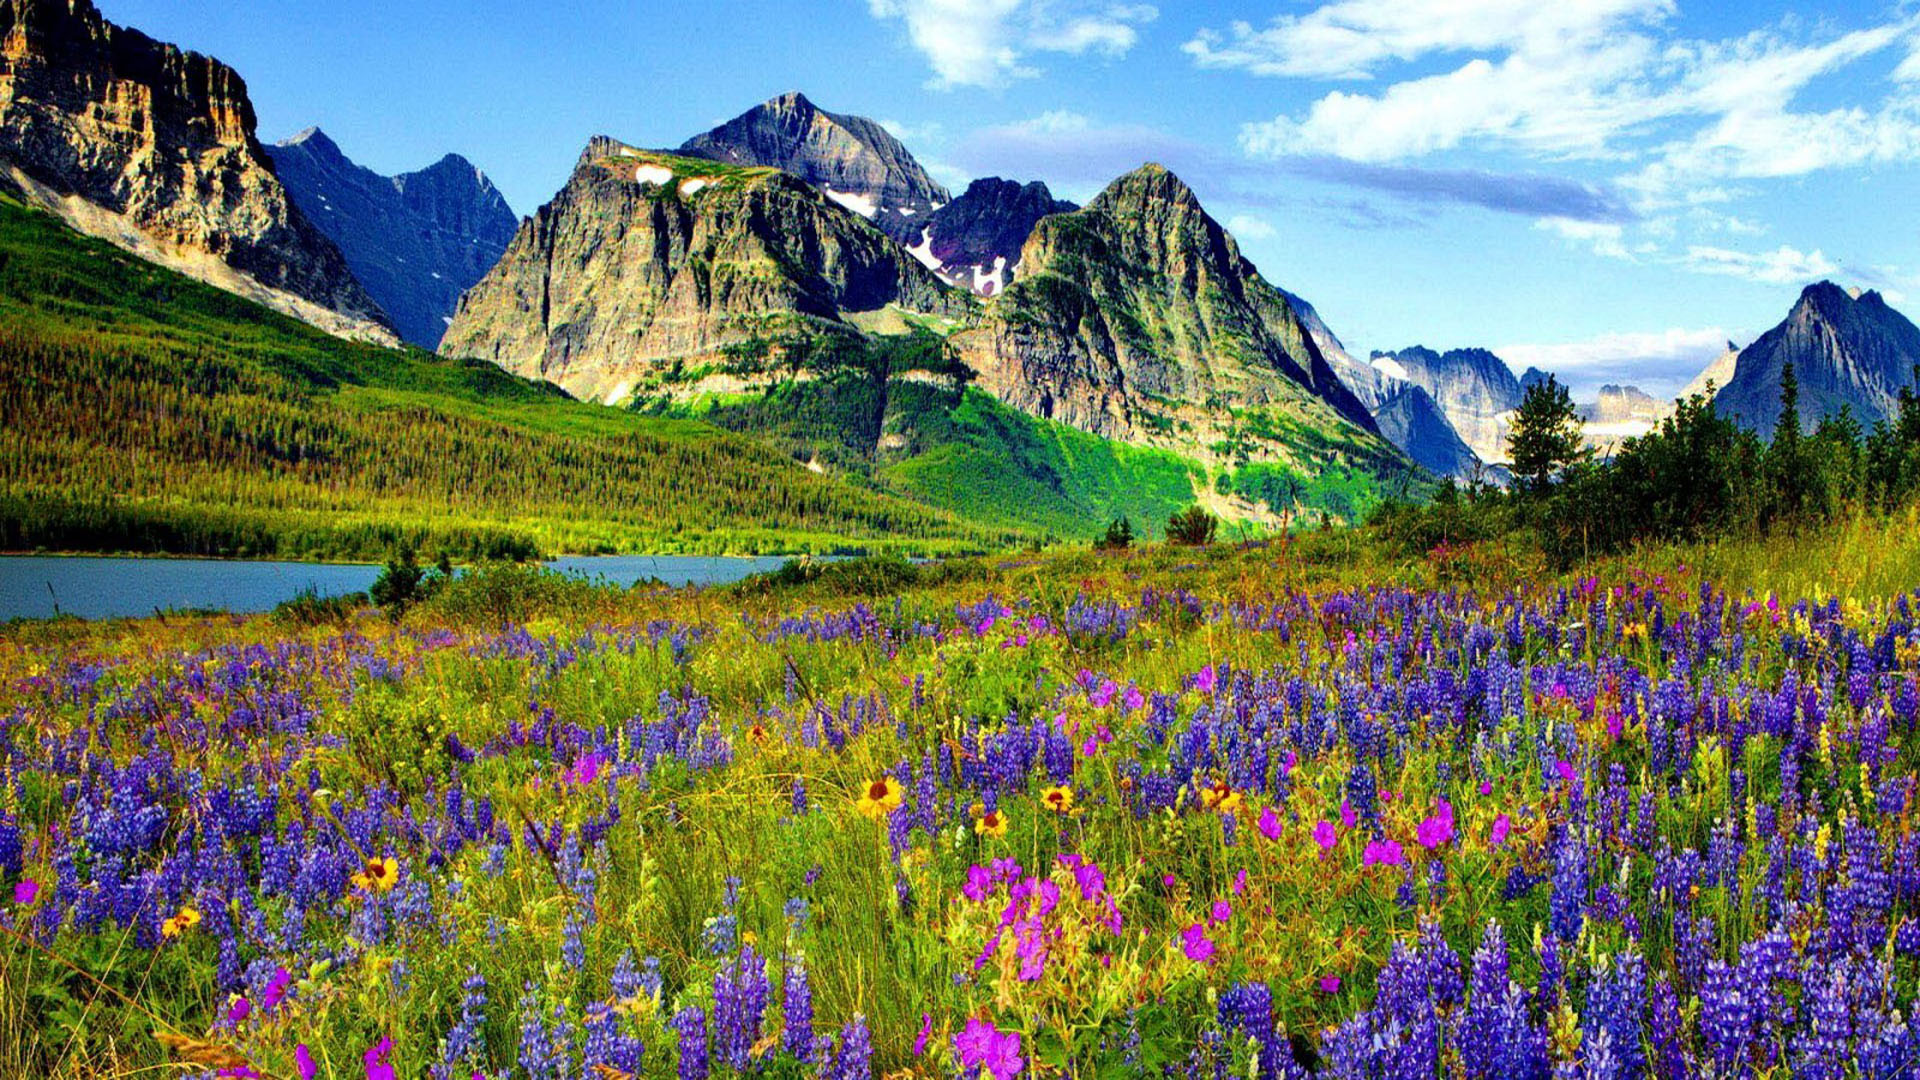 Mountain Flower In Colorado Blue And Purple Flowers Of Lupine River ...